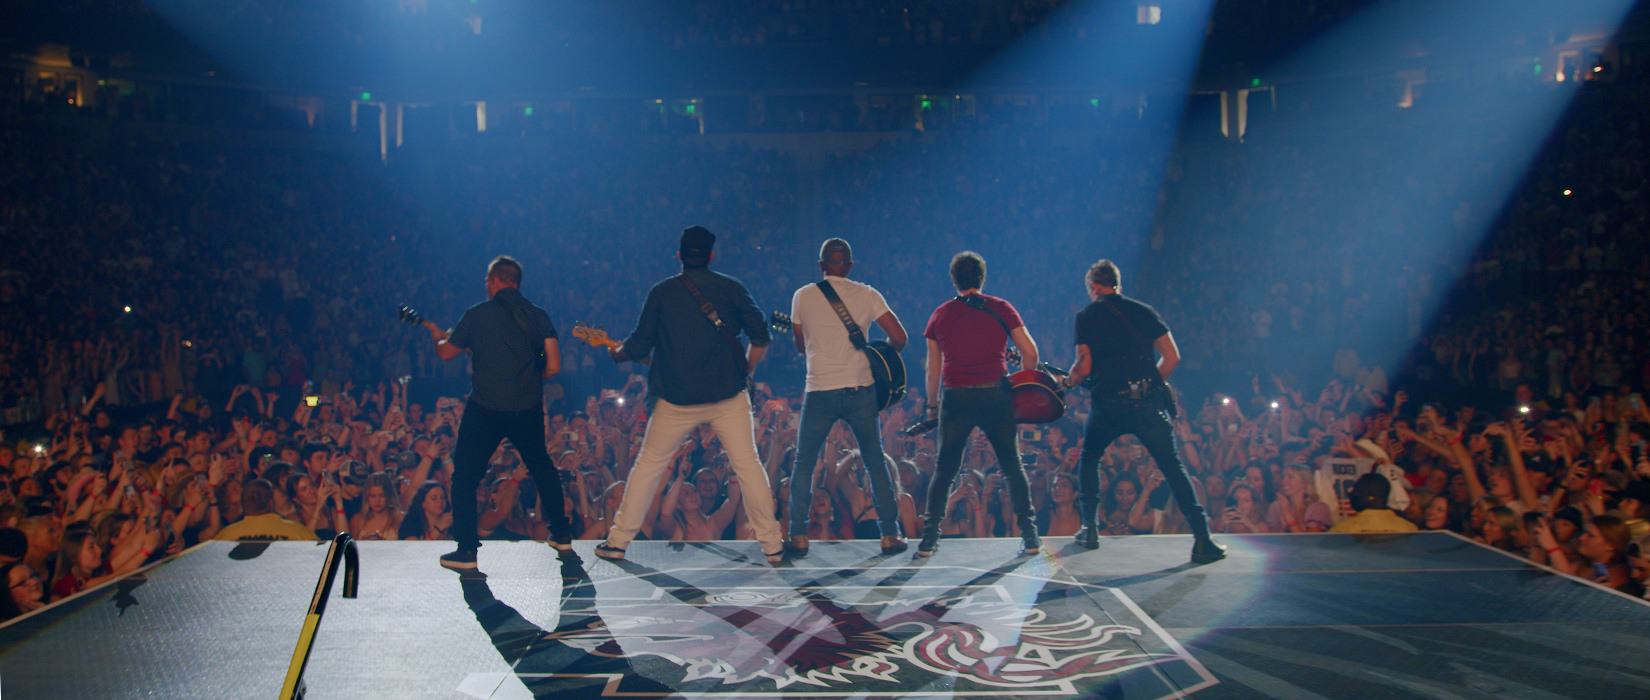 Darius Rucker and bandmates line up on stage, as seen from behind the stage